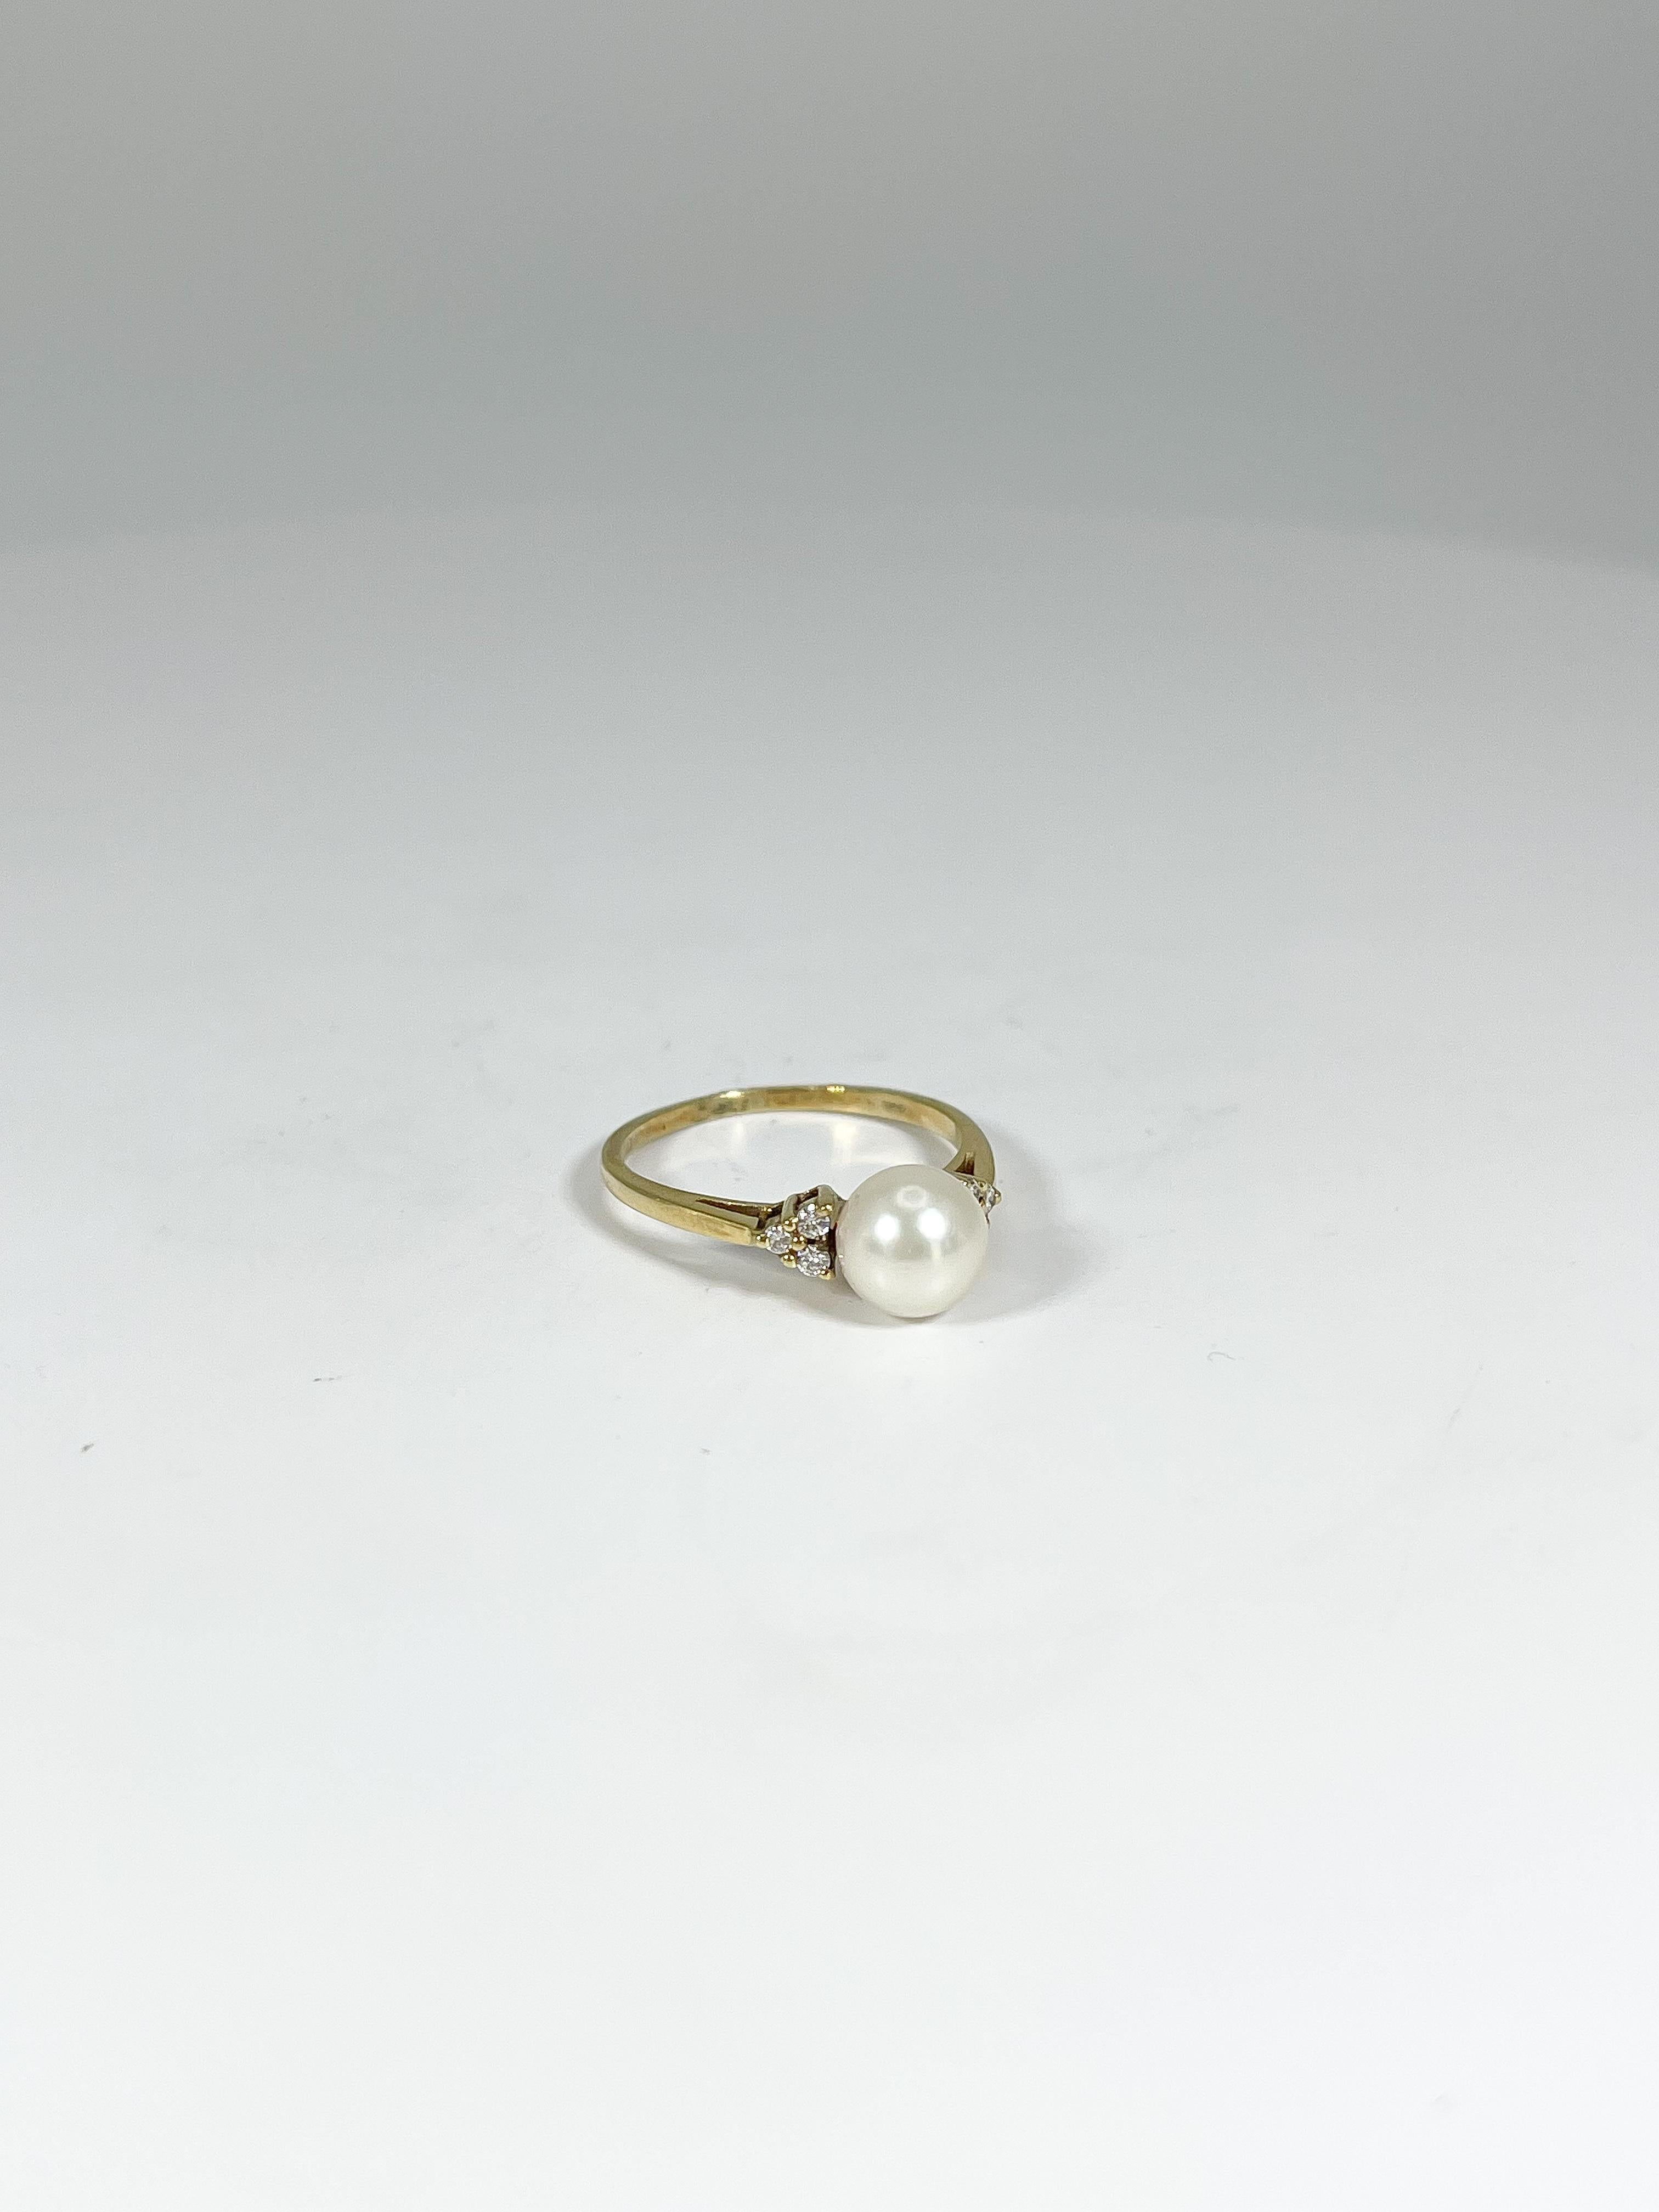 14k yellow gold pearl and diamond ring. Pearl is in the center and there are three diamonds on either side of the pearl. The ring is a size 6 1/4, the pearl has a diameter of 6.8 mm, and the ring has a total weight of 2.07 grams. 